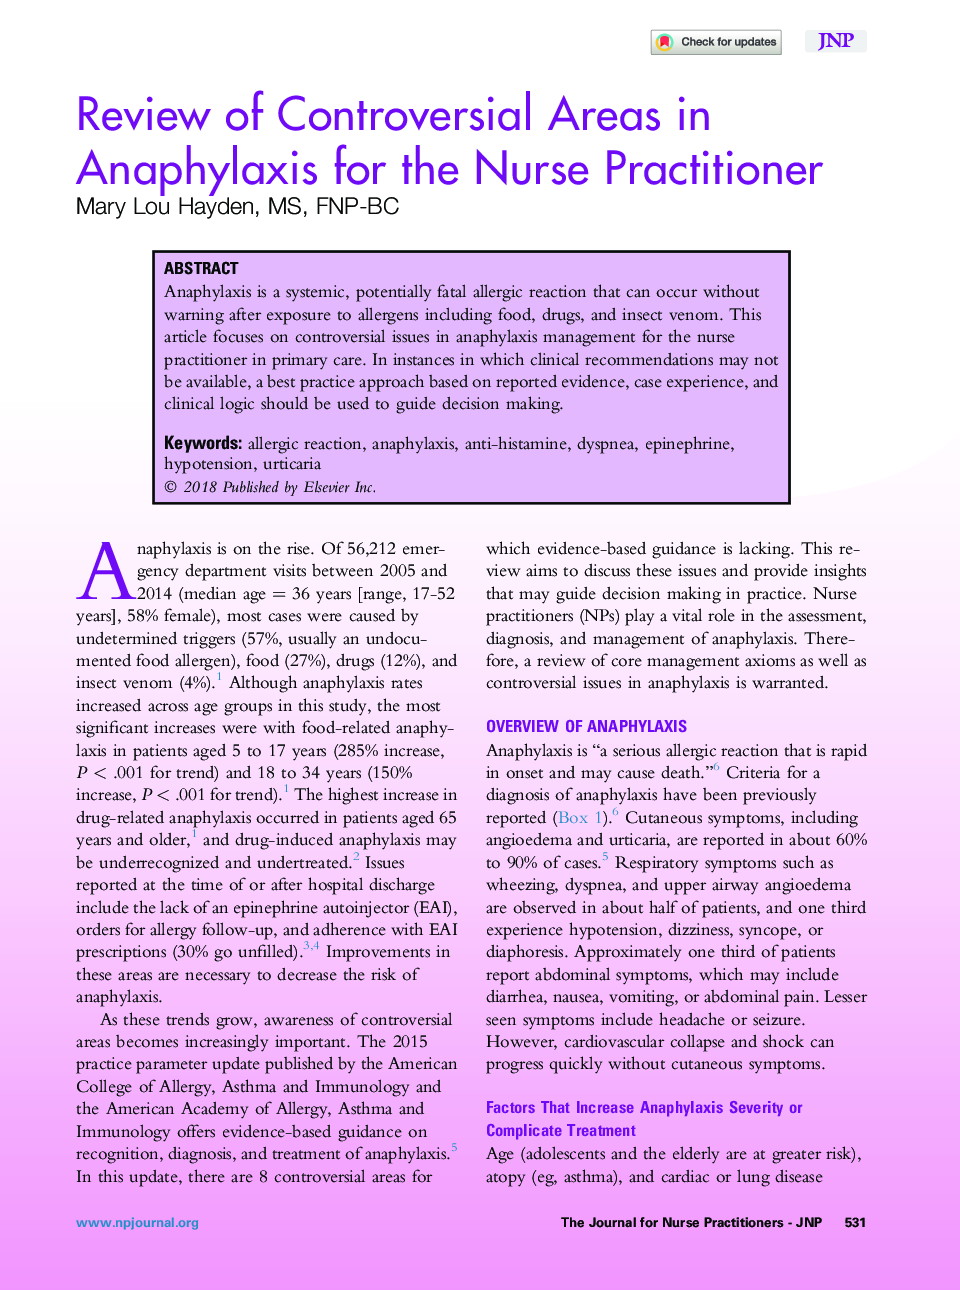 Review of Controversial Areas in Anaphylaxis for the Nurse Practitioner